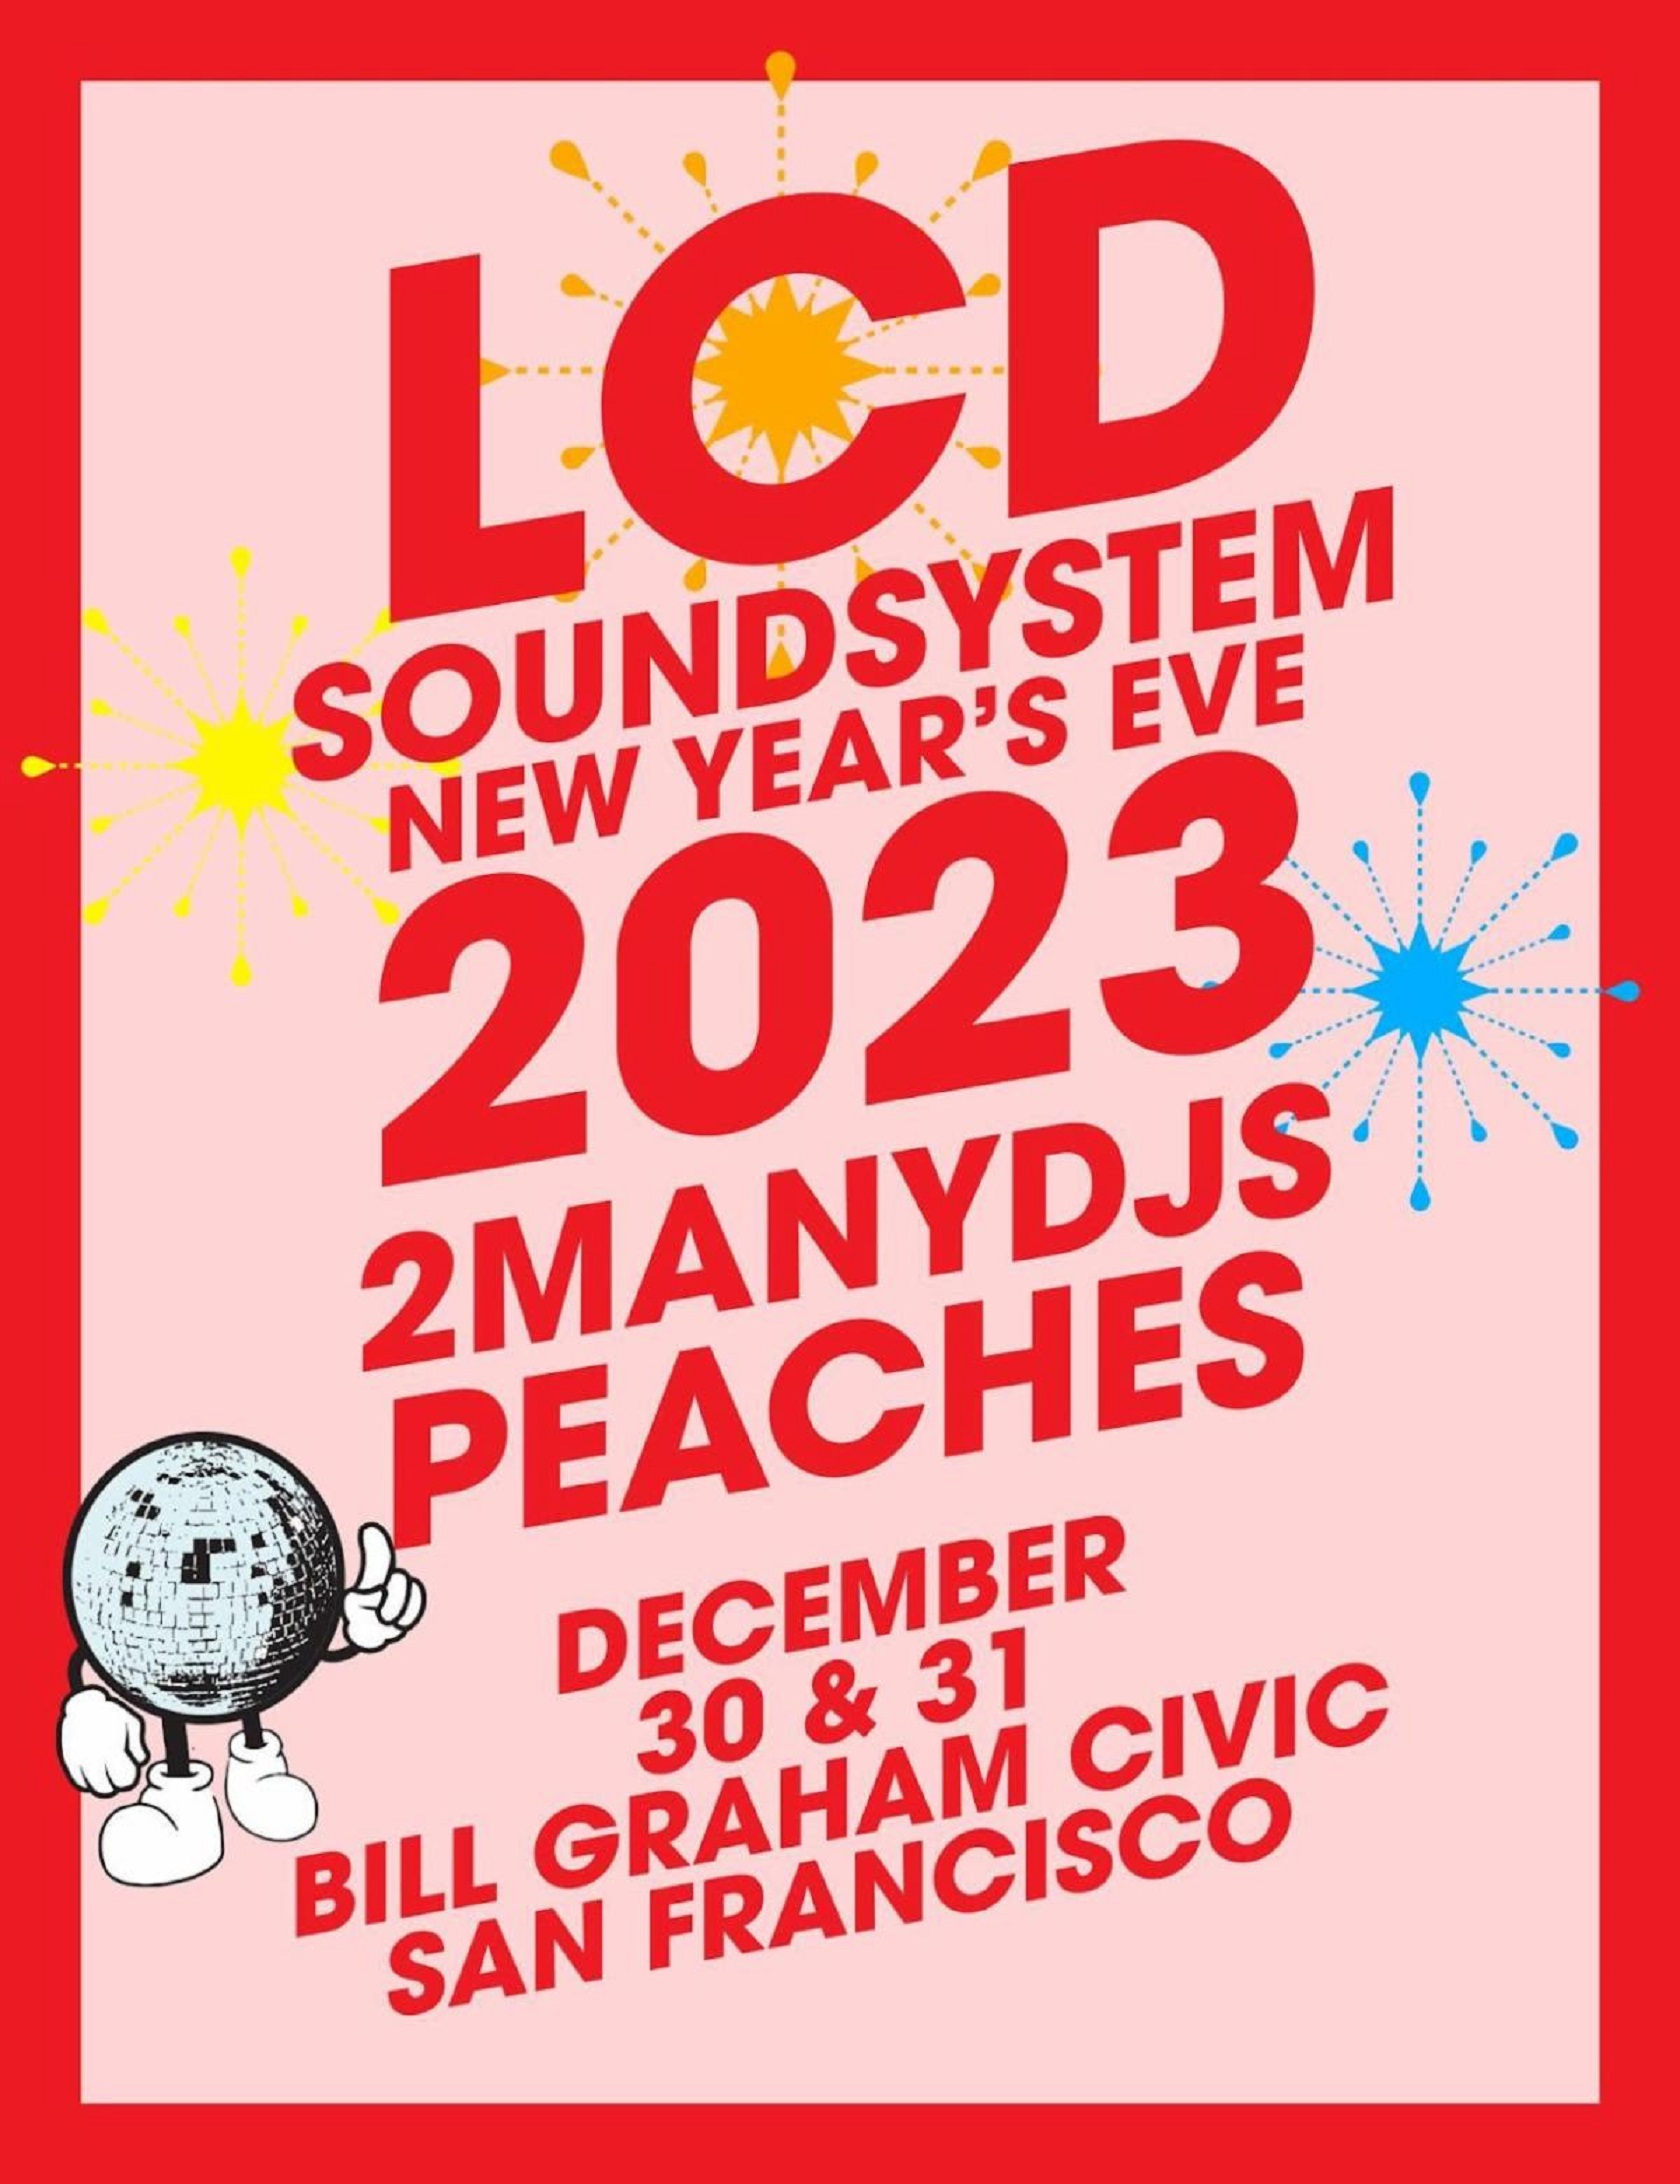 LCD SOUNDSYSTEM  NEW YEAR’S EVE SHOWS – 2 NIGHTS  DECEMBER 30 & 31